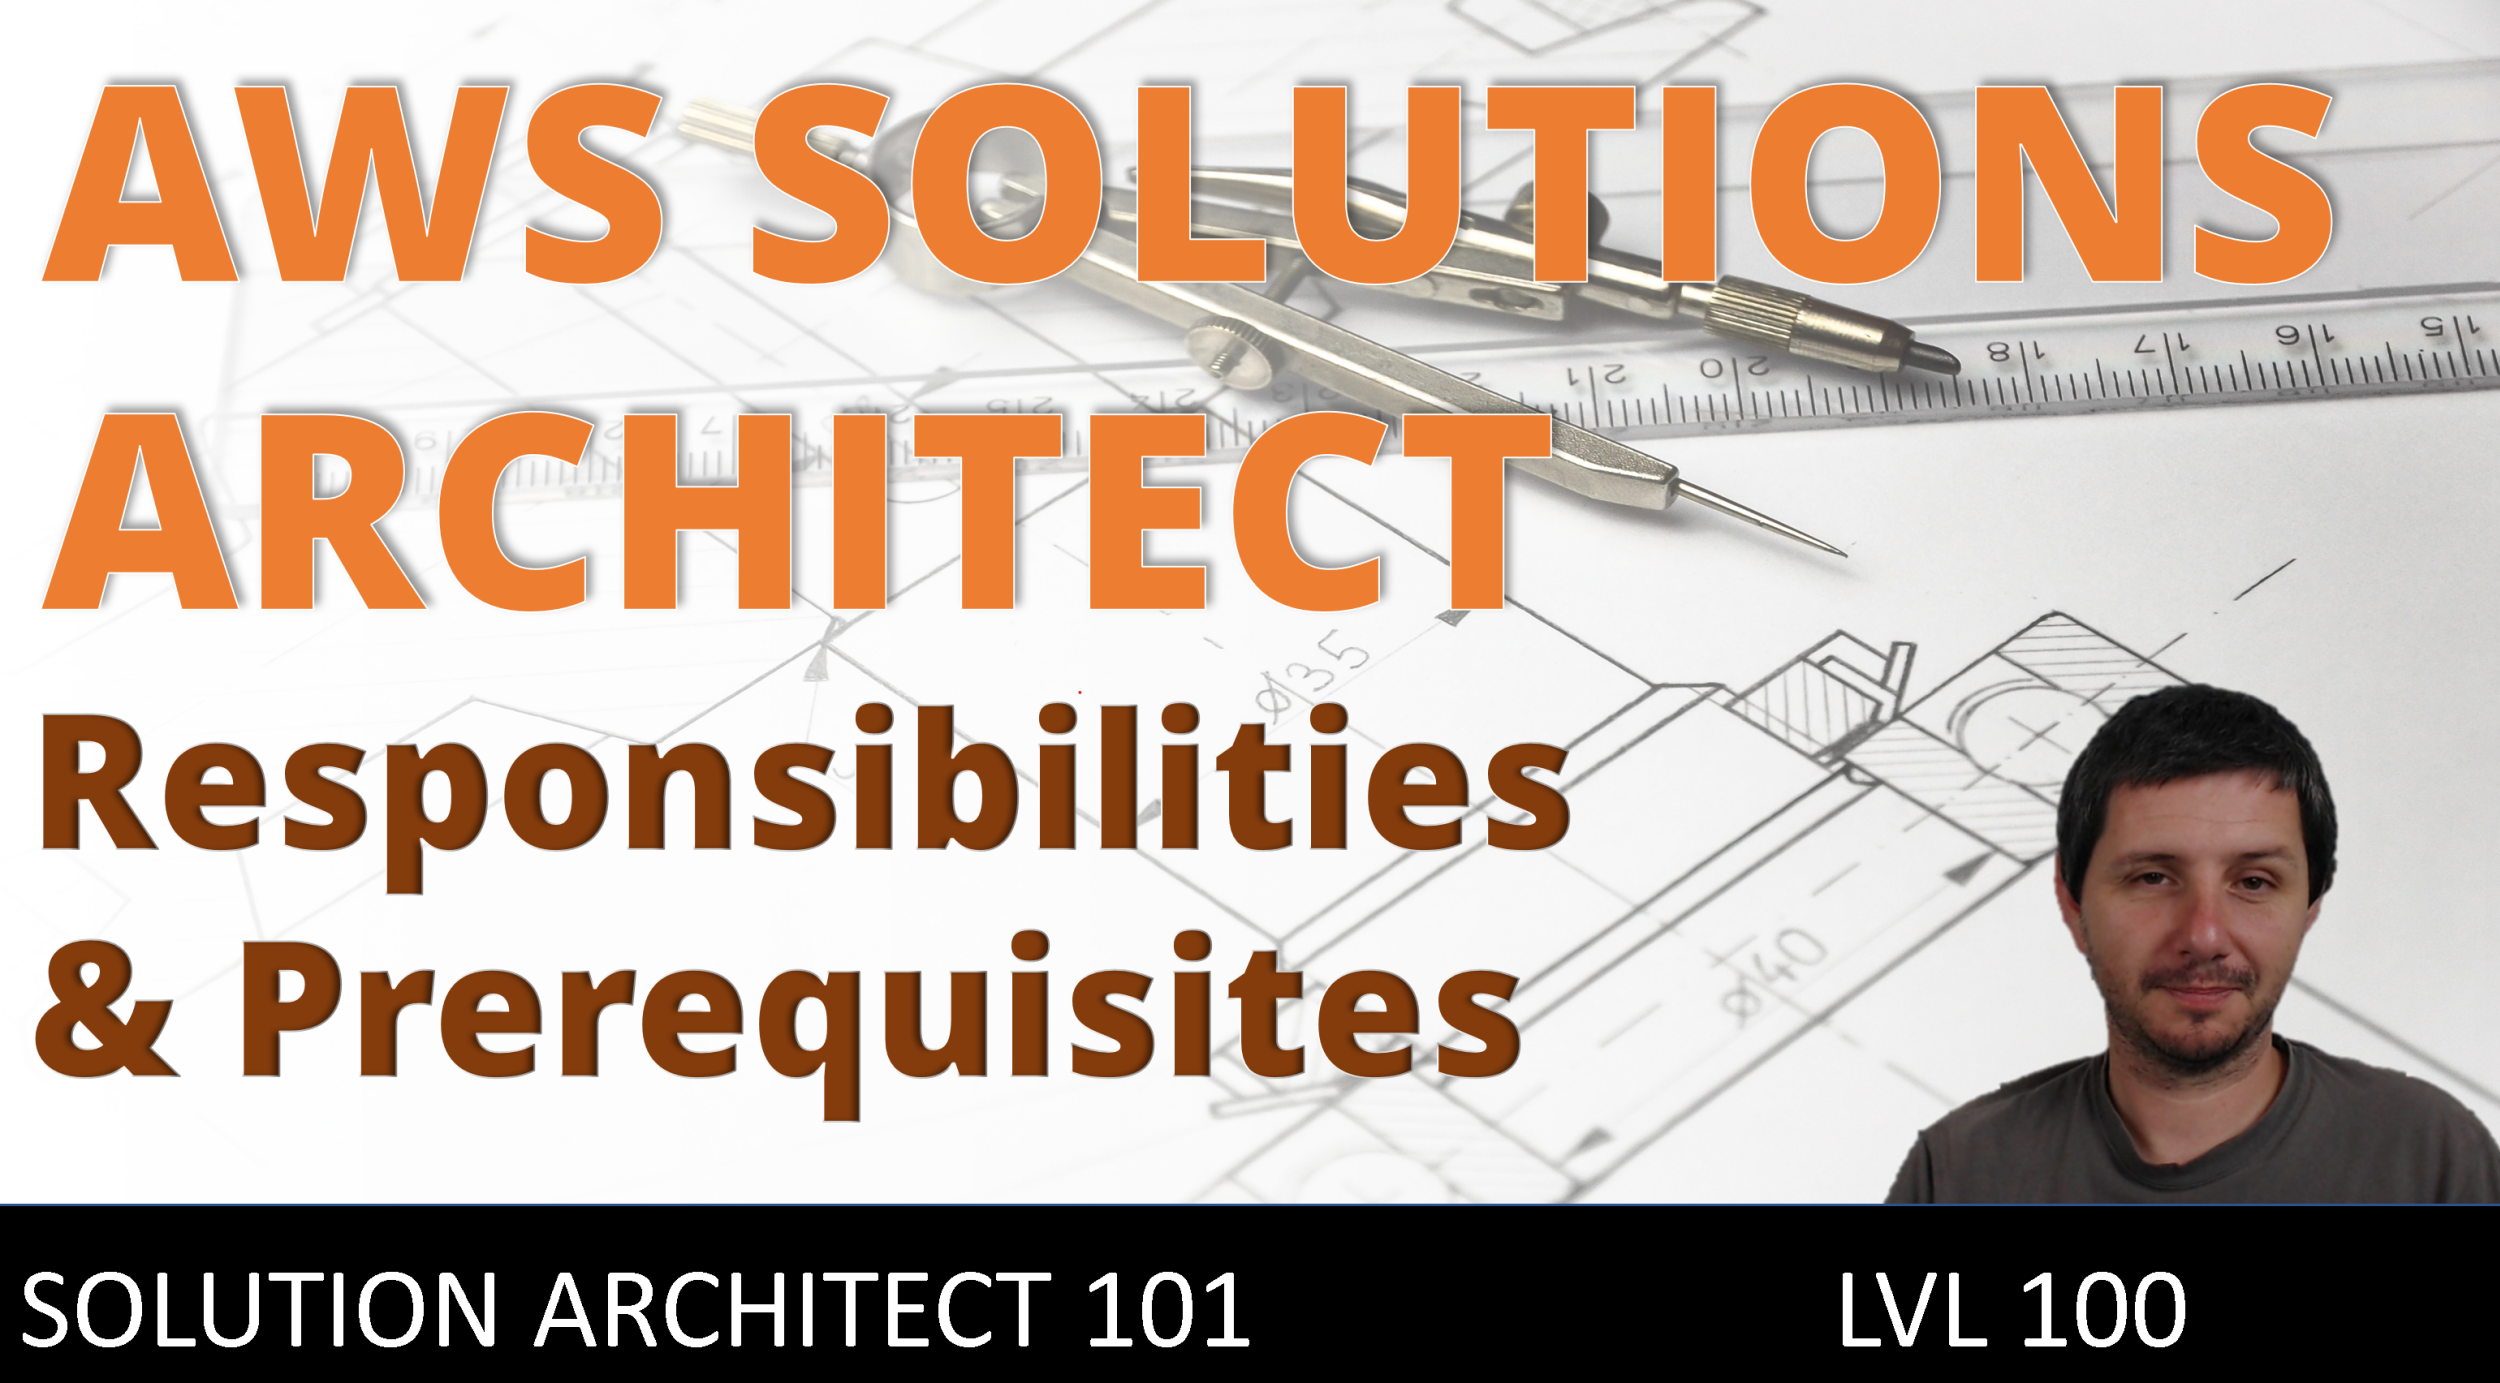 What AWS Solutions Architects do - key responsibilities and prerequisites